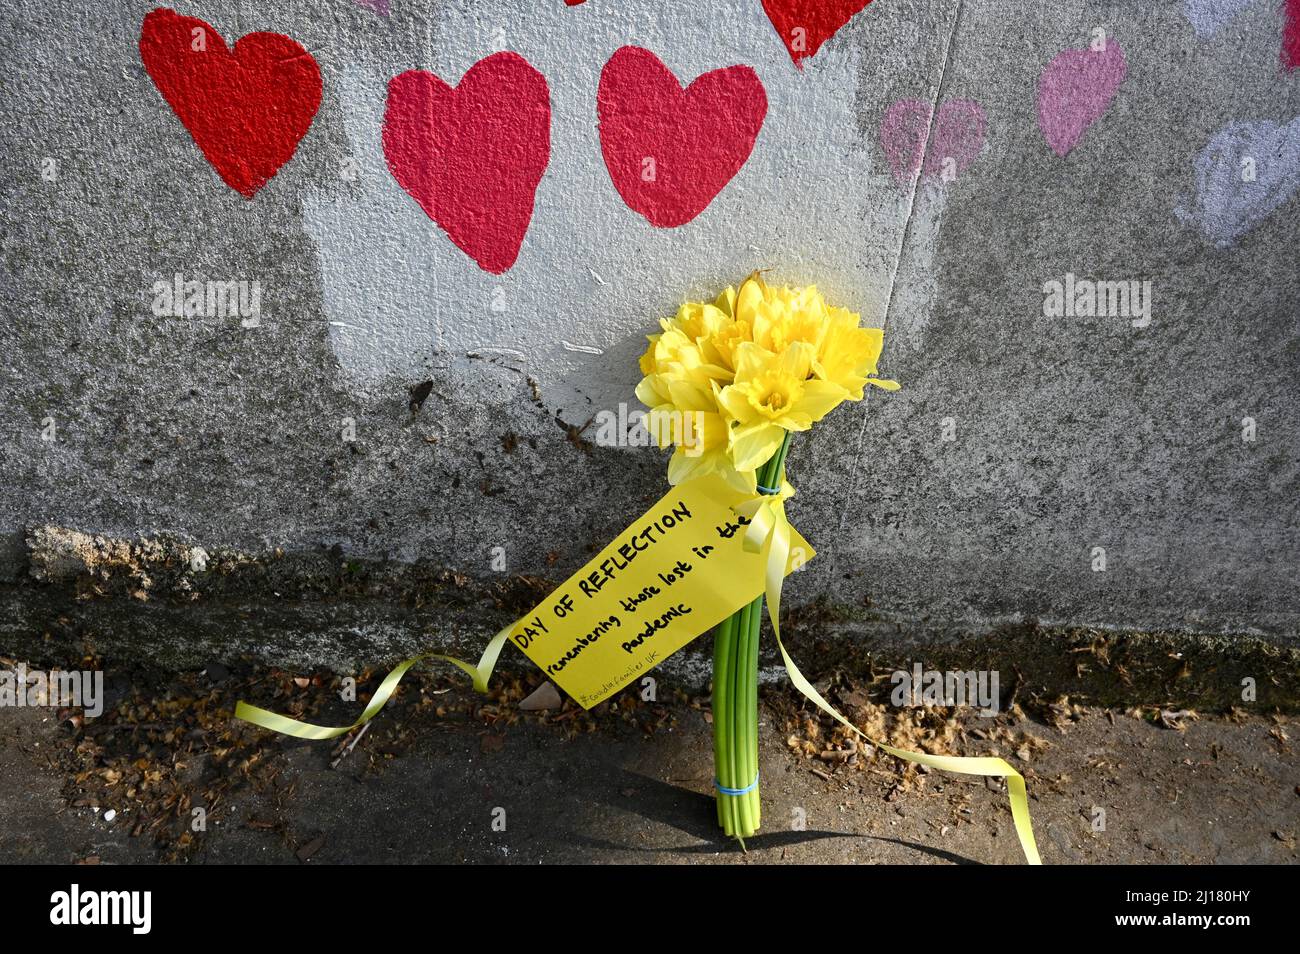 London, UK. A day of reflection took place at the National Covid Memorial Wall on the second anniversary of the first lockdown. The event was organised by Covid19 families uk the only national network of support groups across the UK for those who have become bereaved during the Pandemic. Credit: michael melia/Alamy Live News Stock Photo